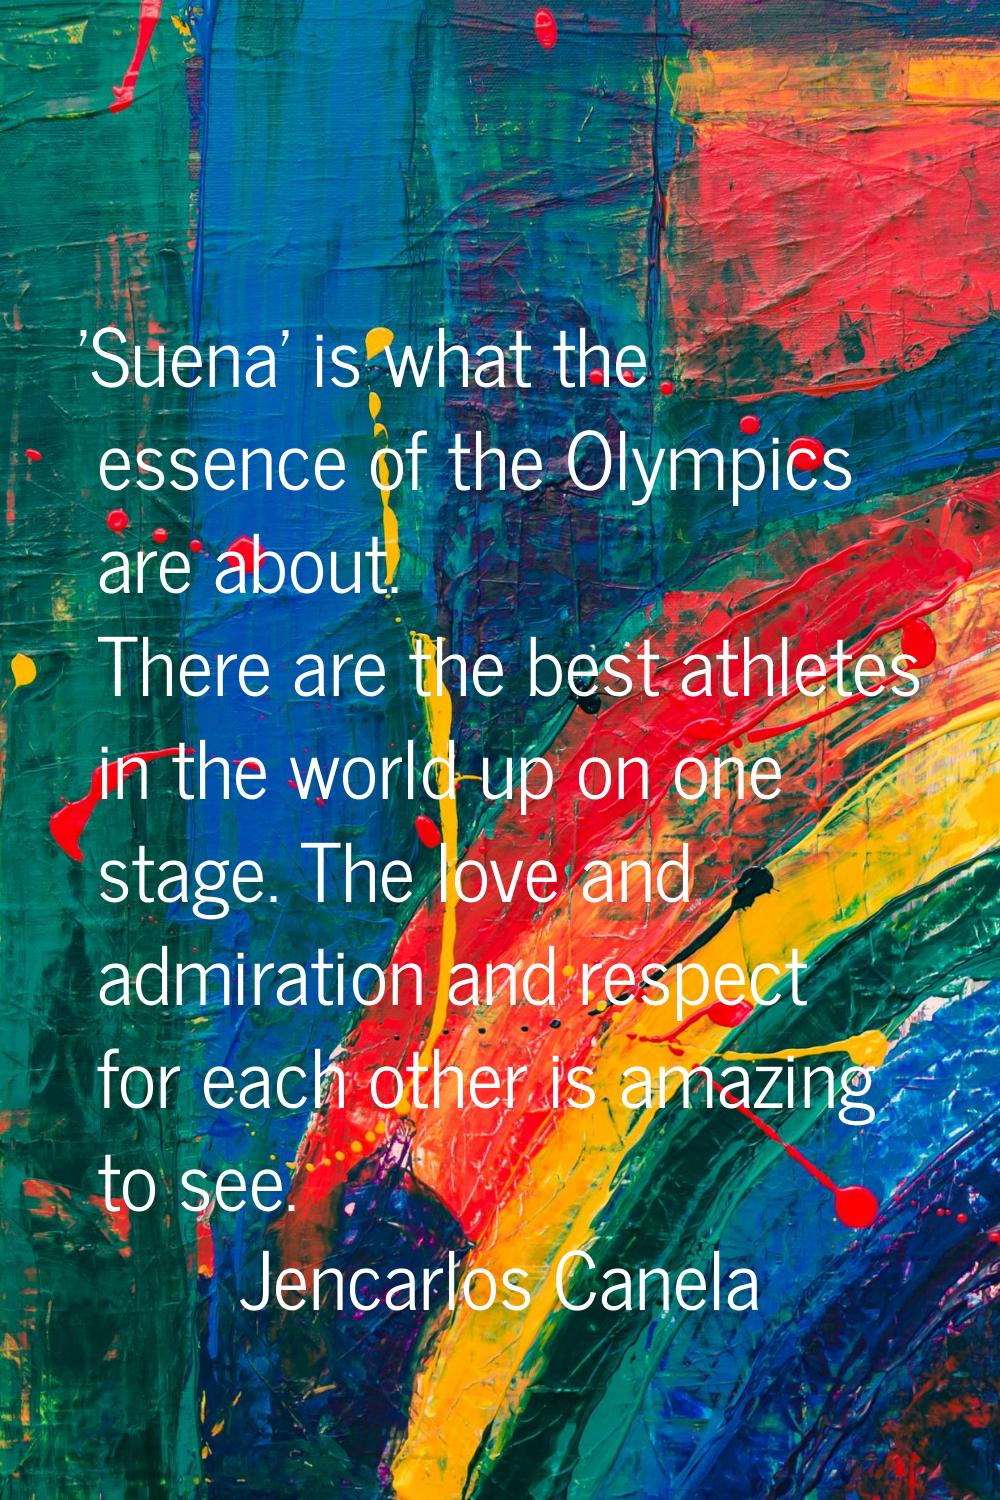 'Suena' is what the essence of the Olympics are about. There are the best athletes in the world up 